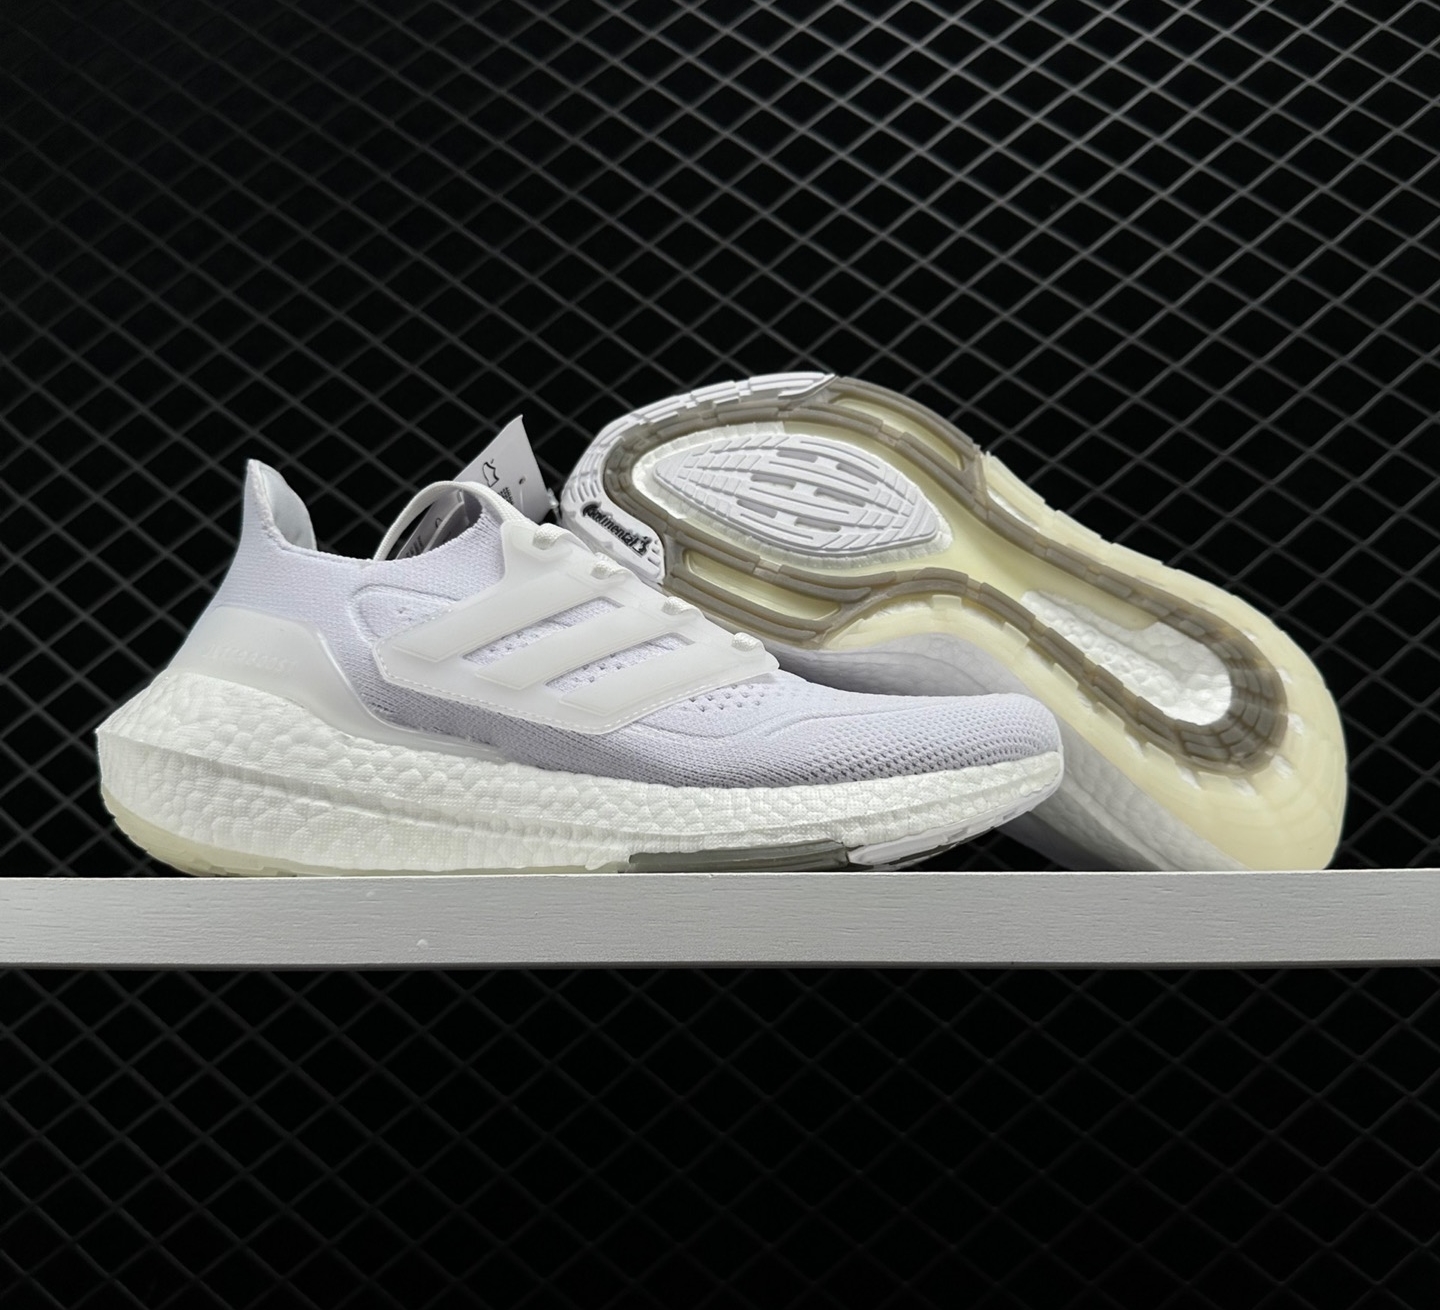 Adidas UltraBoost 21 'Cloud White' FY0403 - Premium Comfort and Style